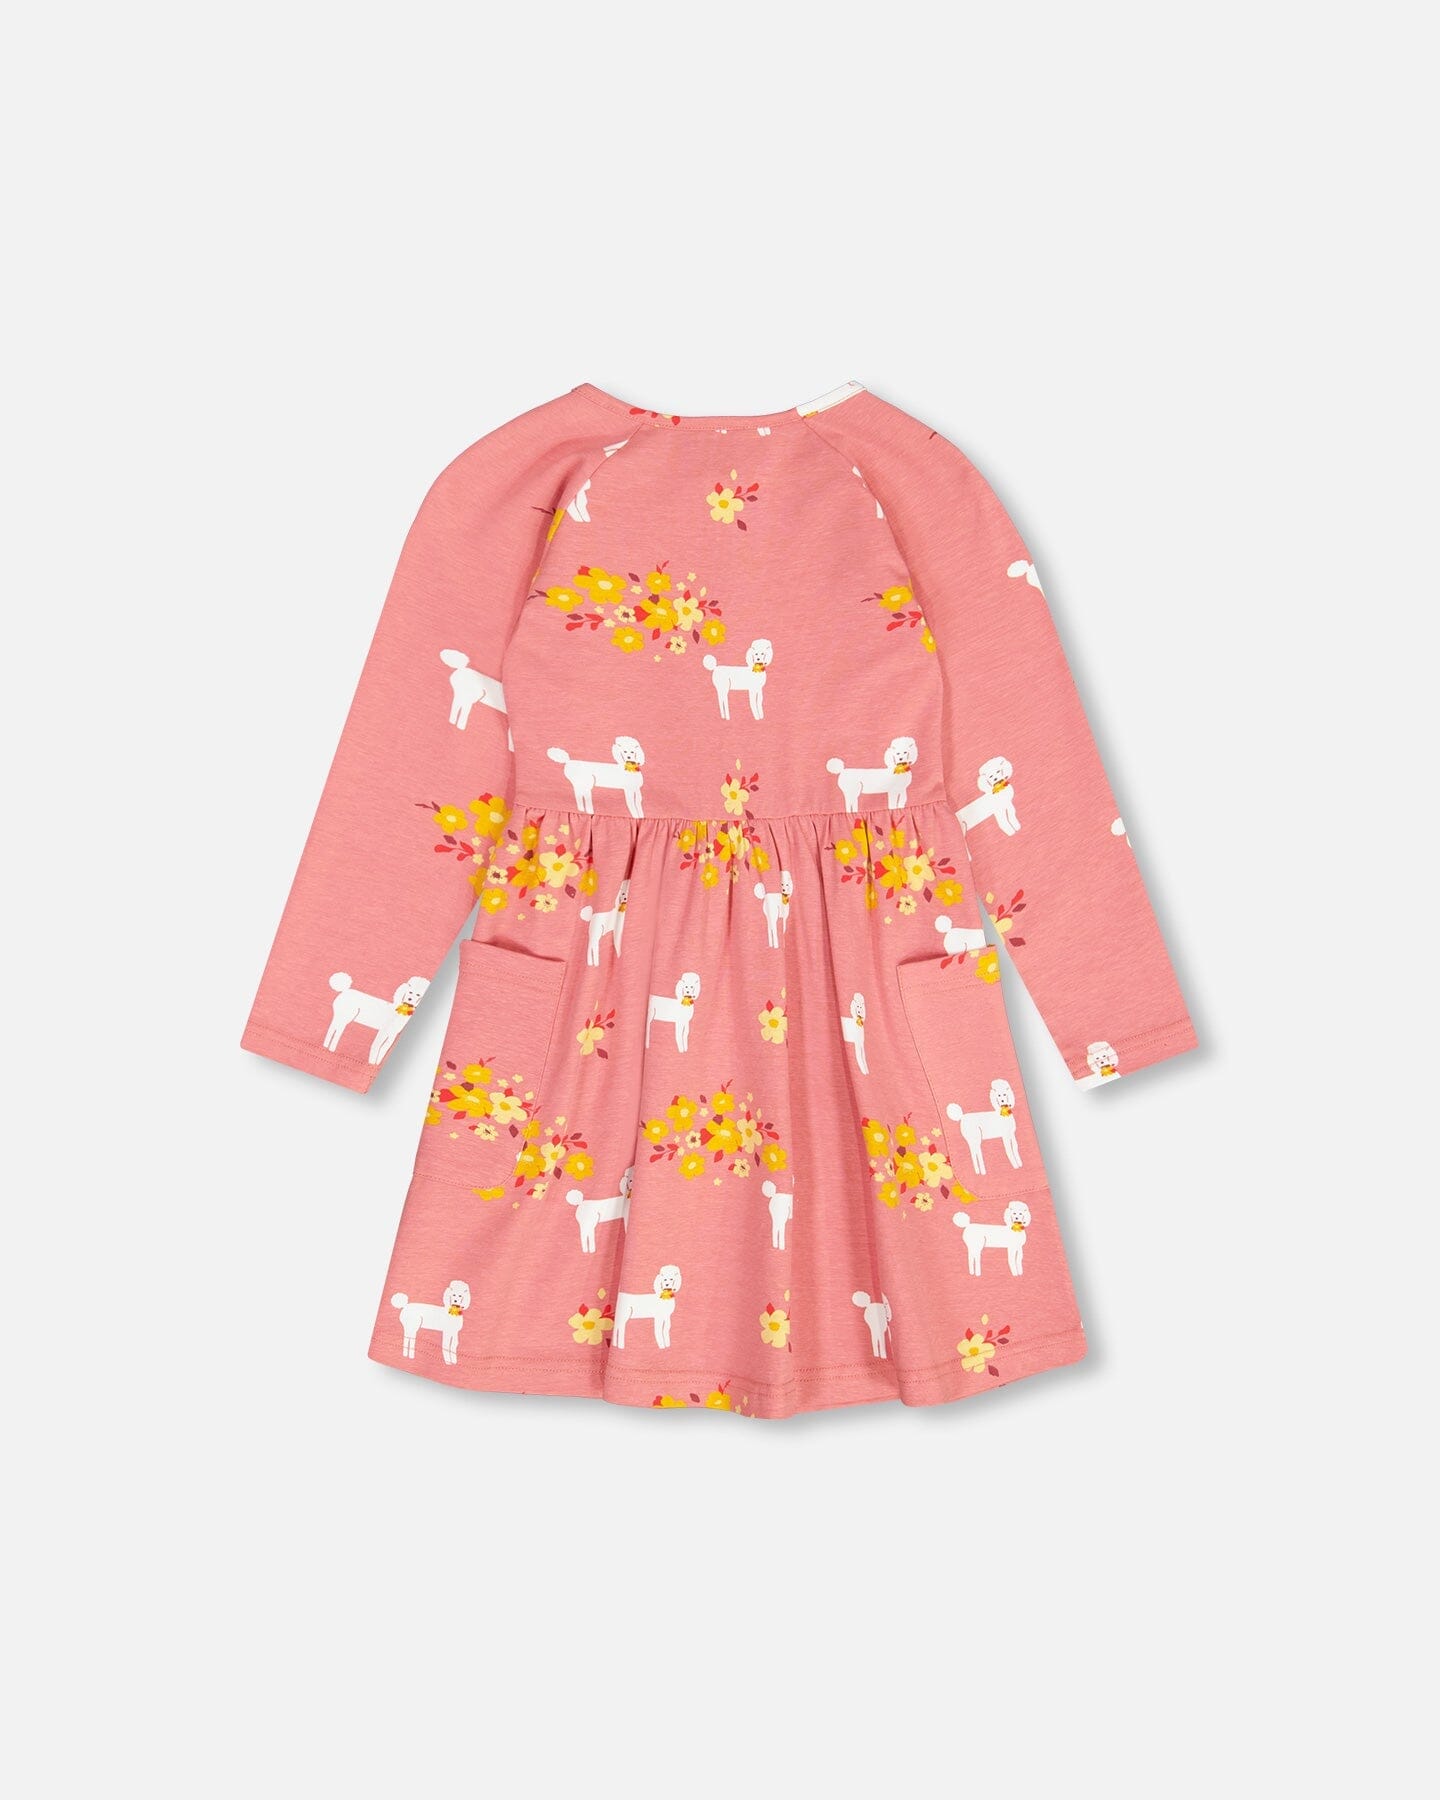 Organic Jersey Dress With Pockets Pink Poodle Print